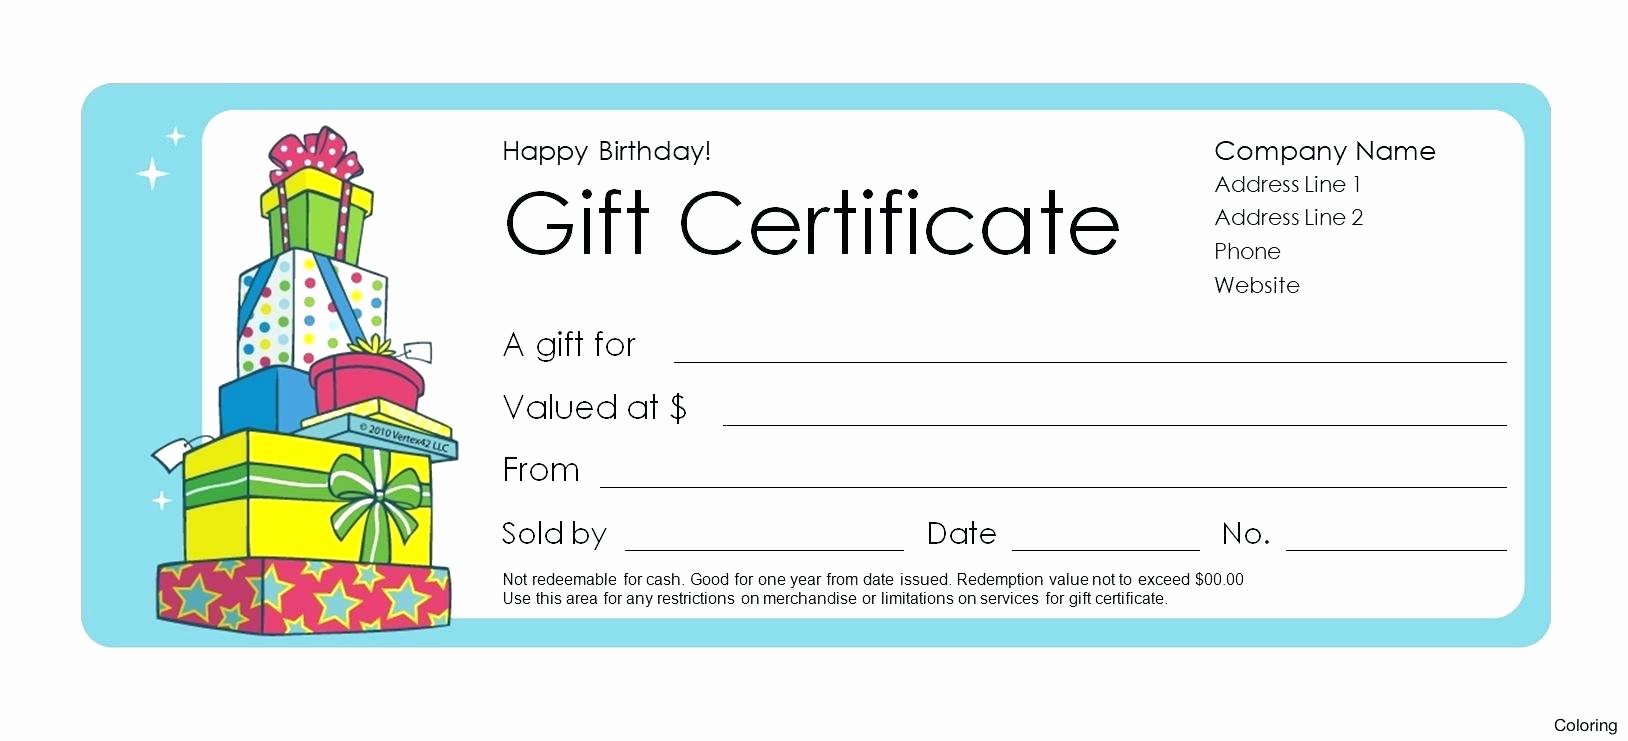 Word Template Gift Certificate Lovely How to Numbered Gift Certificates In Publisher Gift Ftempo